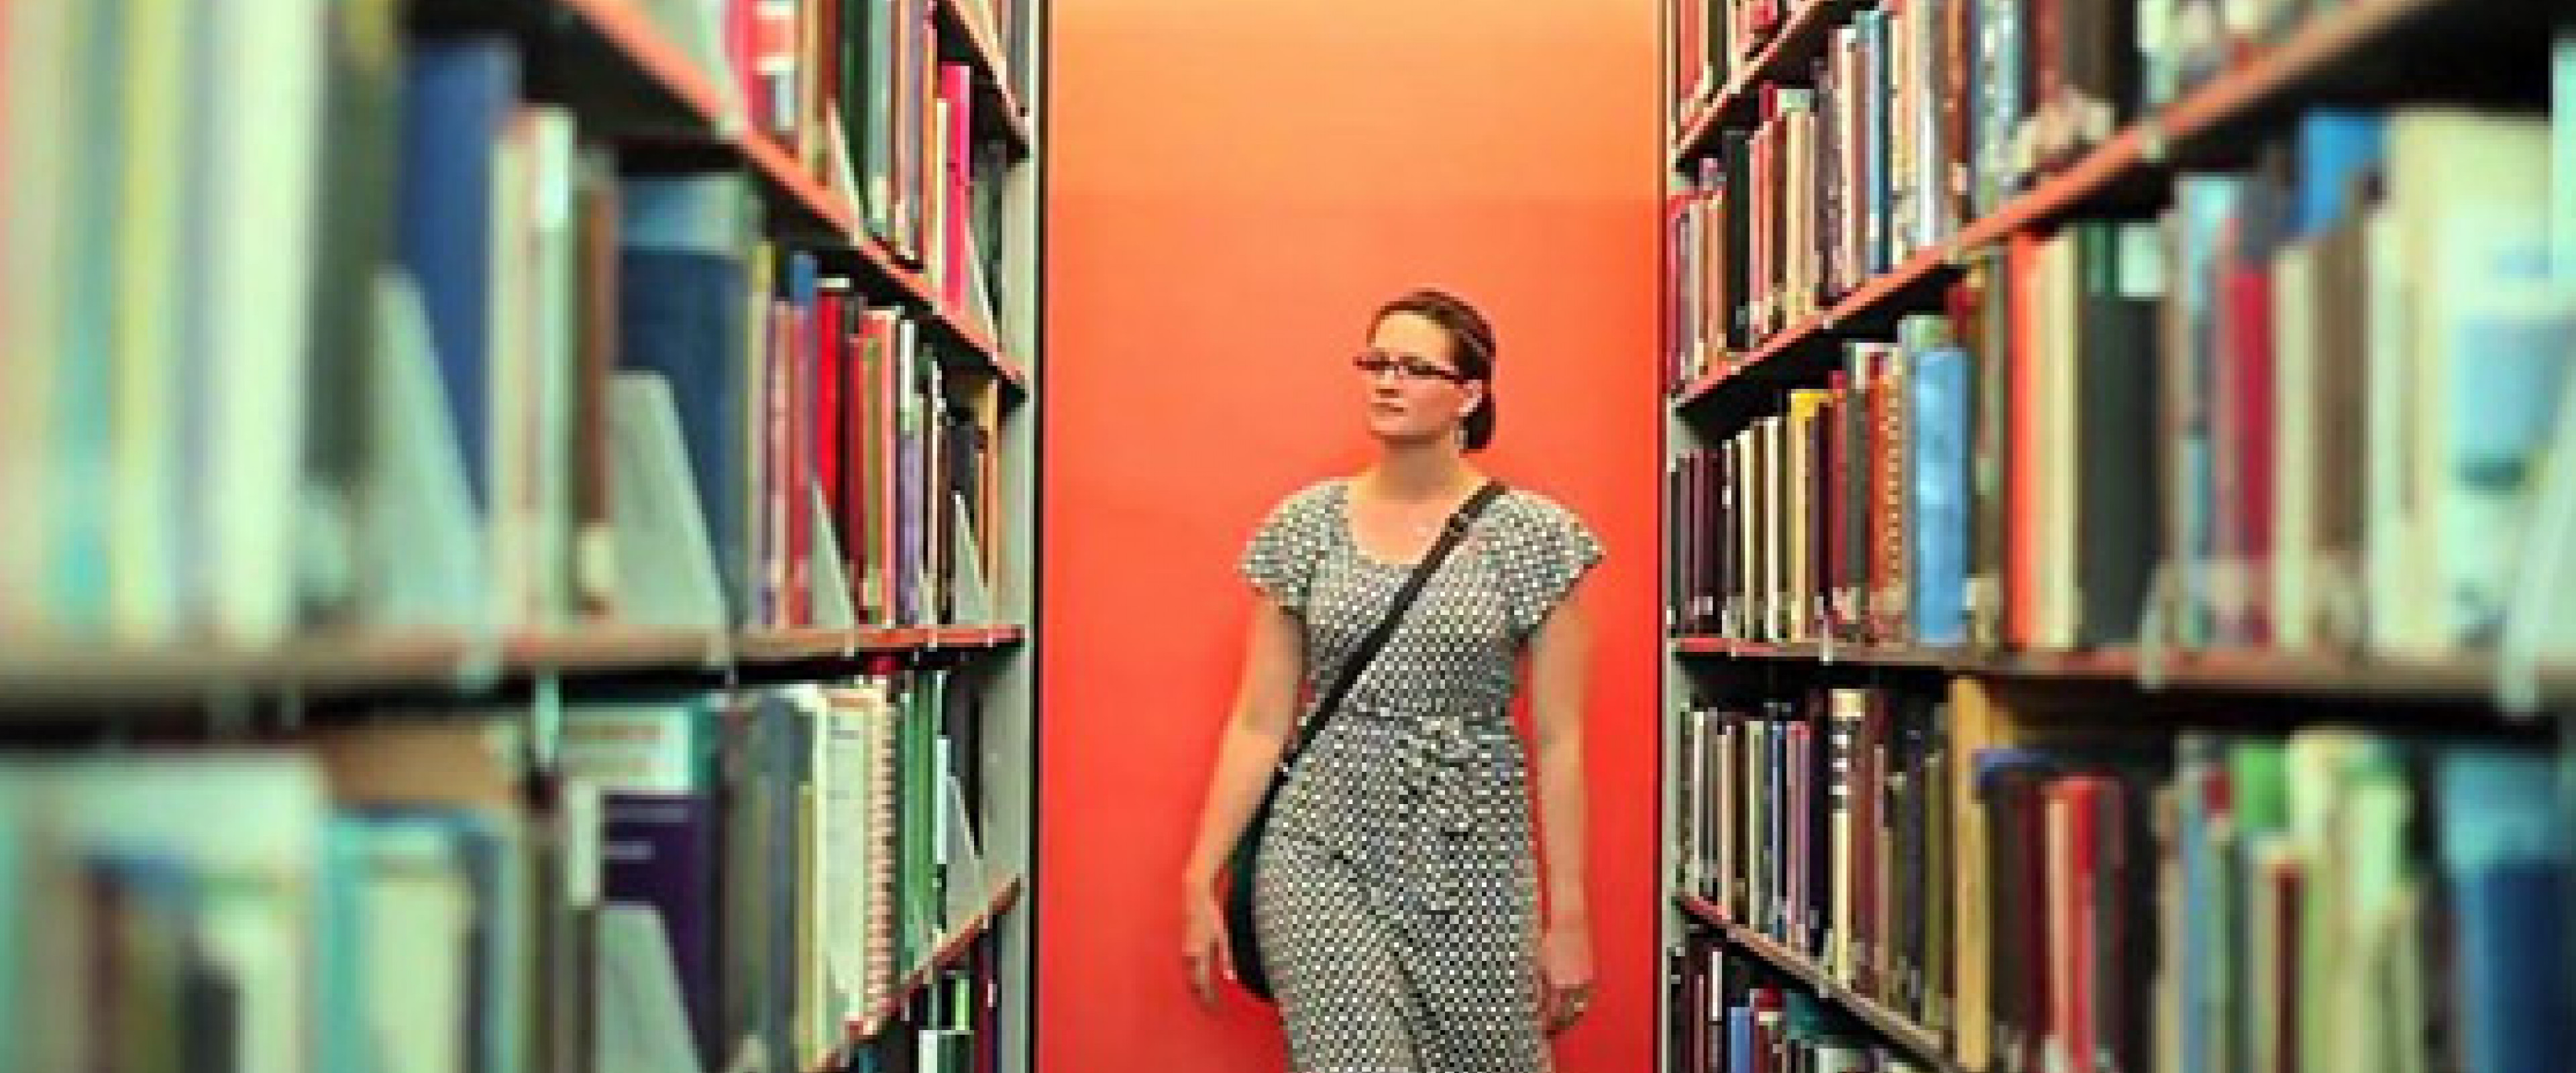 student walking through library